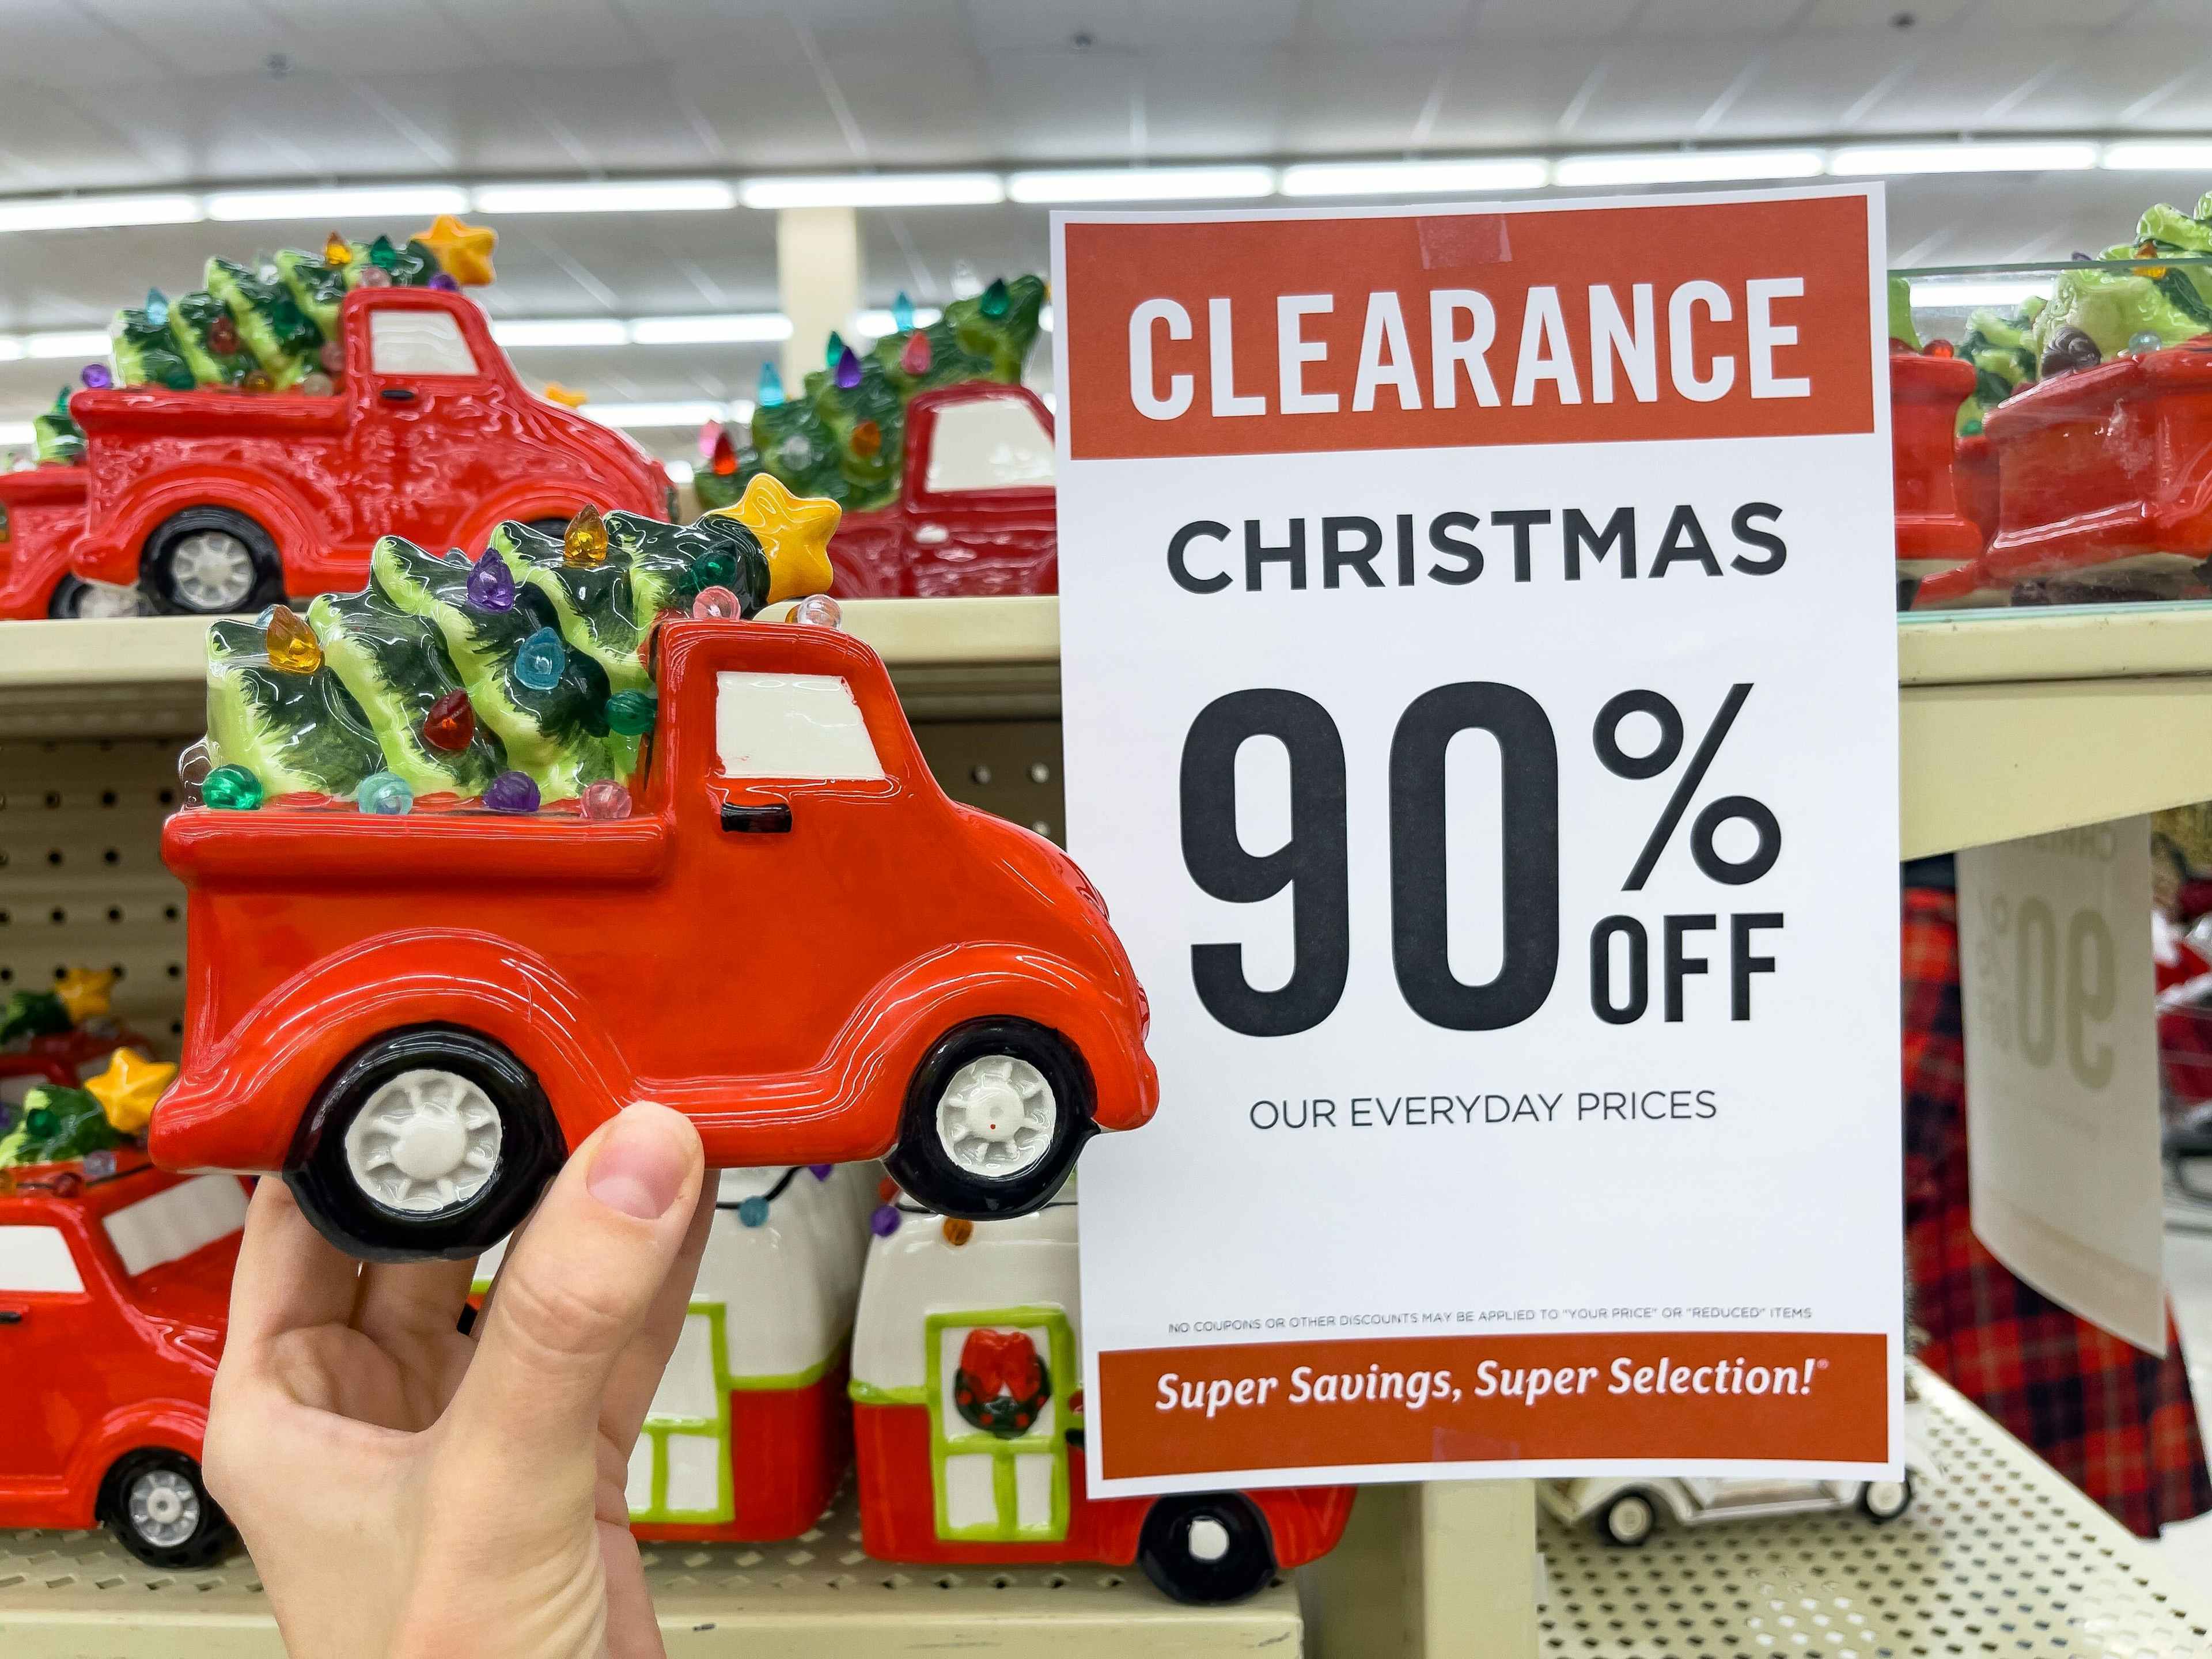 Hobby Lobby in store image of 90% off Christmas Clearance on Jan 02 2023